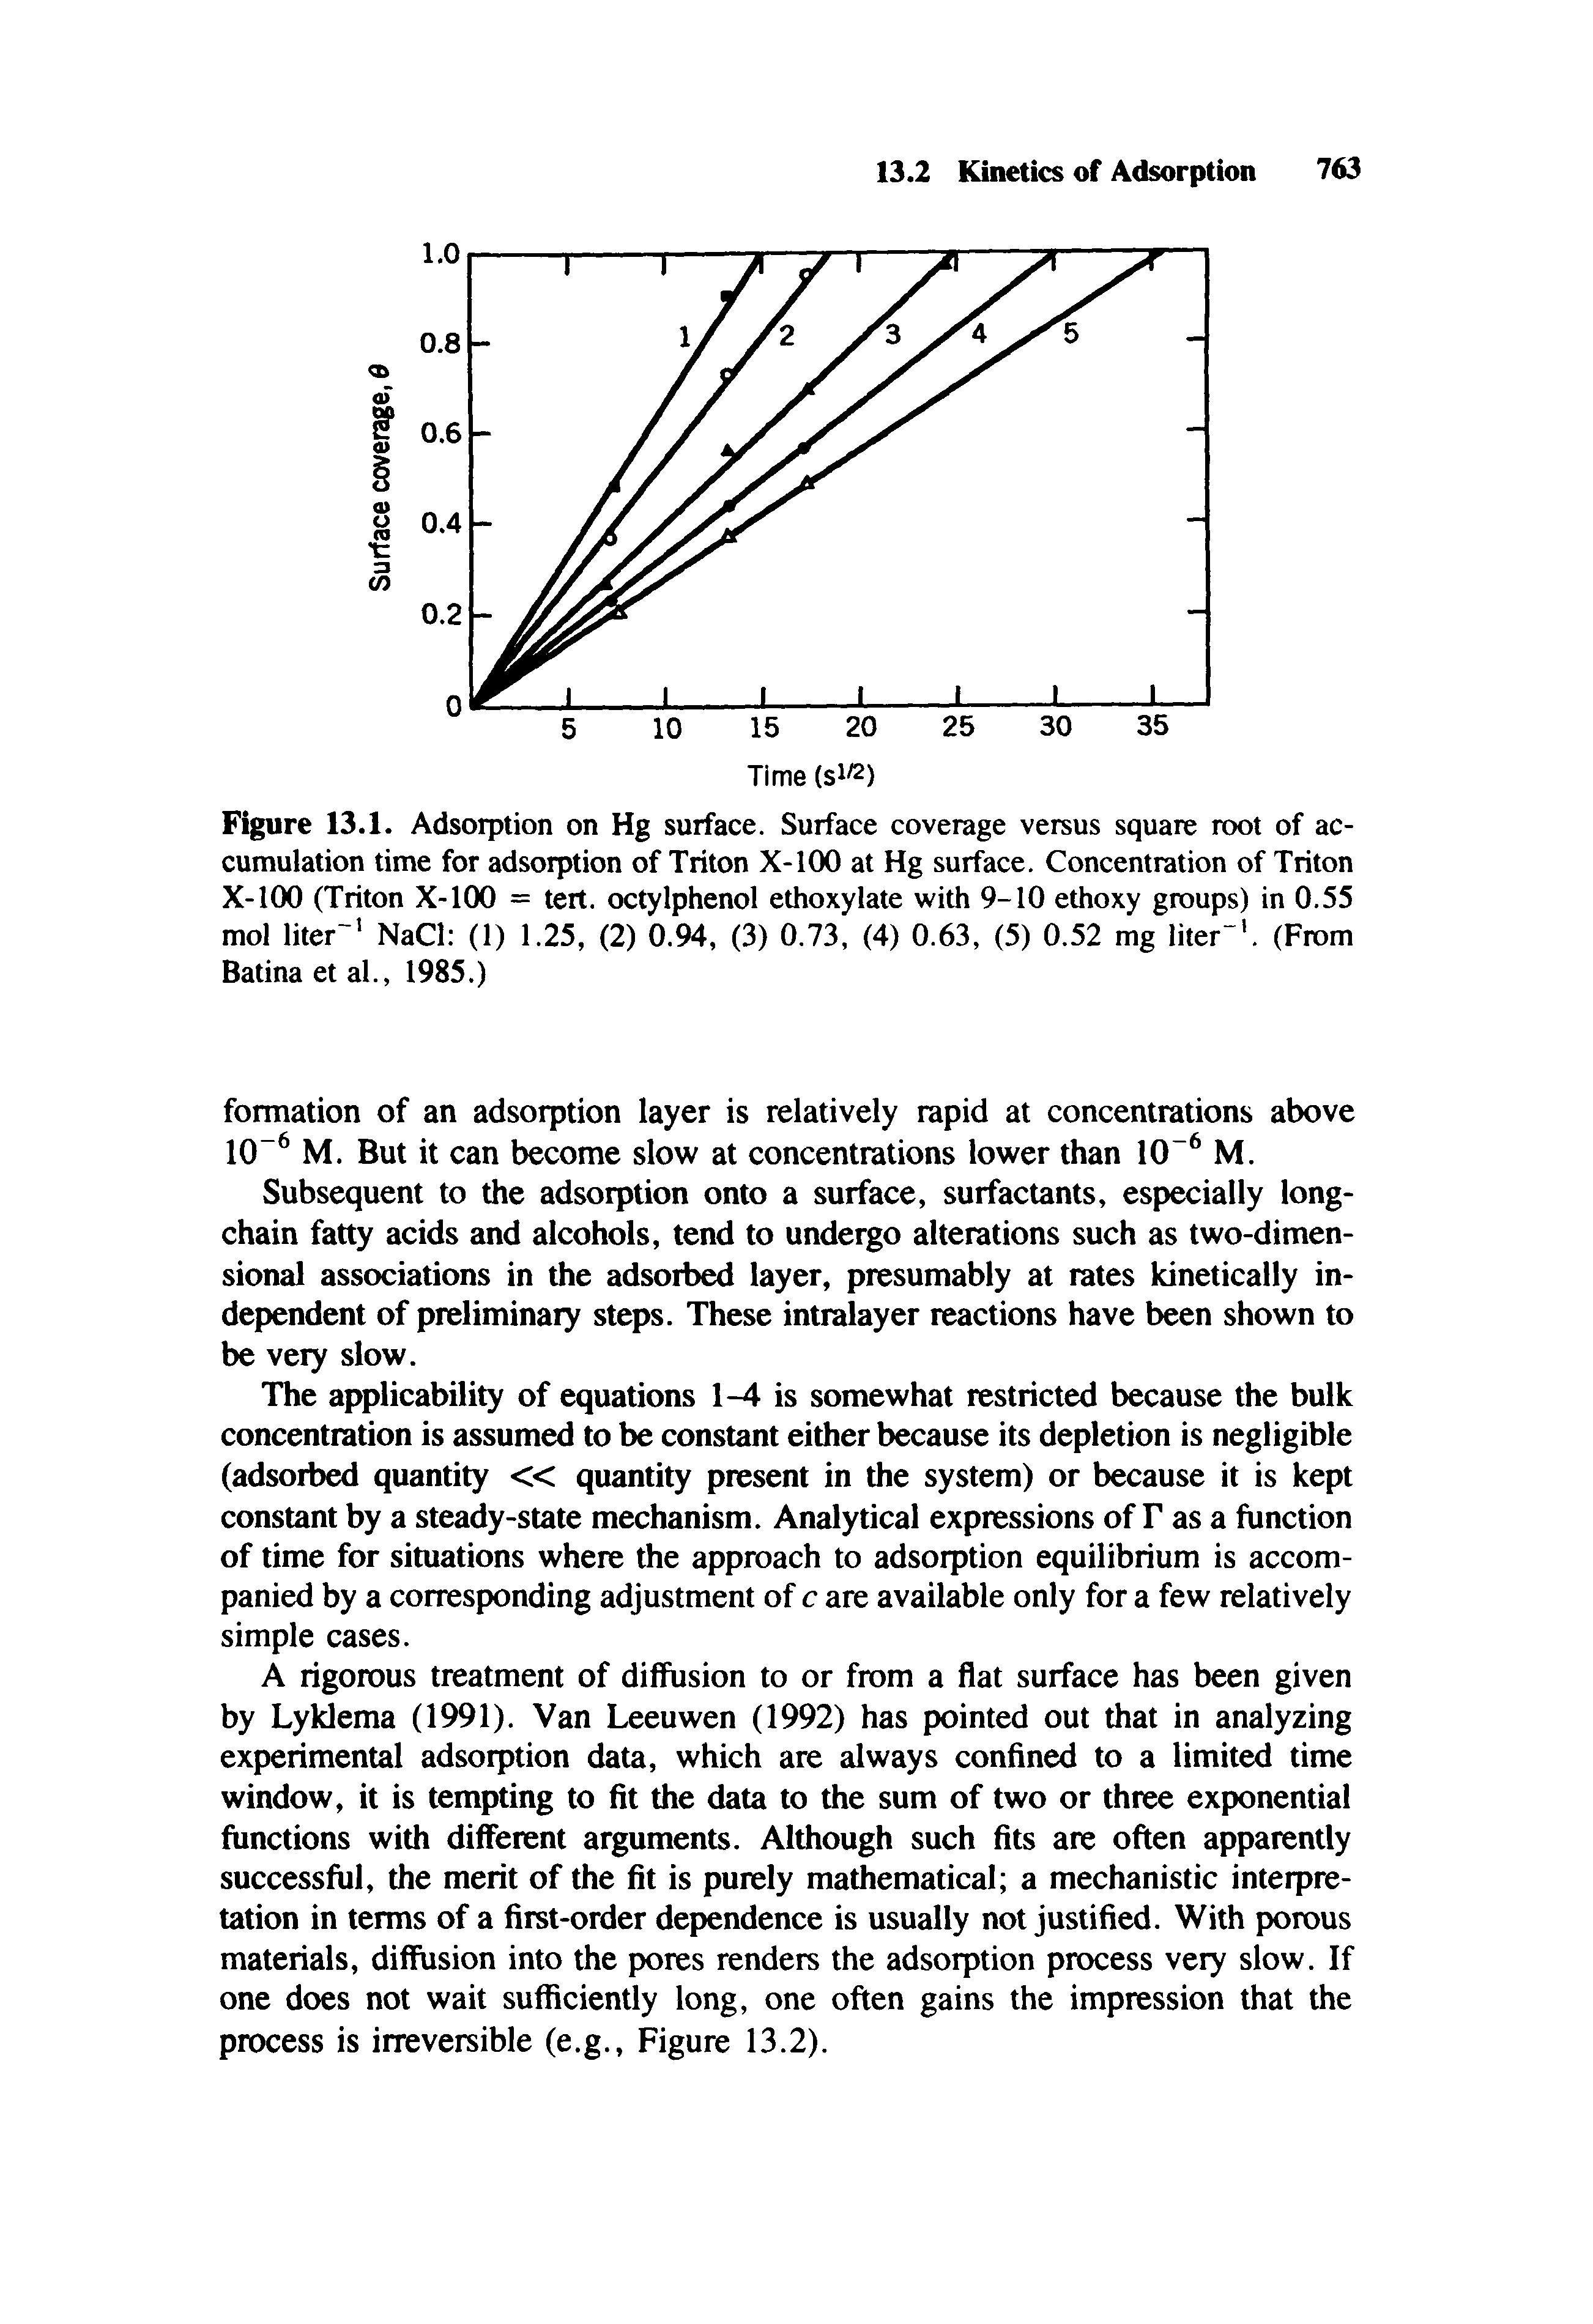 Figure 13.1. Adsorption on Hg surface. Surface coverage versus square root of accumulation time for adsorption of Triton X-100 at Hg surface. Concentration of Triton X-100 (Triton X-KX) = tert. octylphenol ethoxylate with 9-10 ethoxy groups) in 0.55 mol liter" NaCl (1) 1.25, (2) 0.94, (3) 0.73, (4) 0.63, (5) 0.52 mg liter". (From Batina etal., 1985.)...